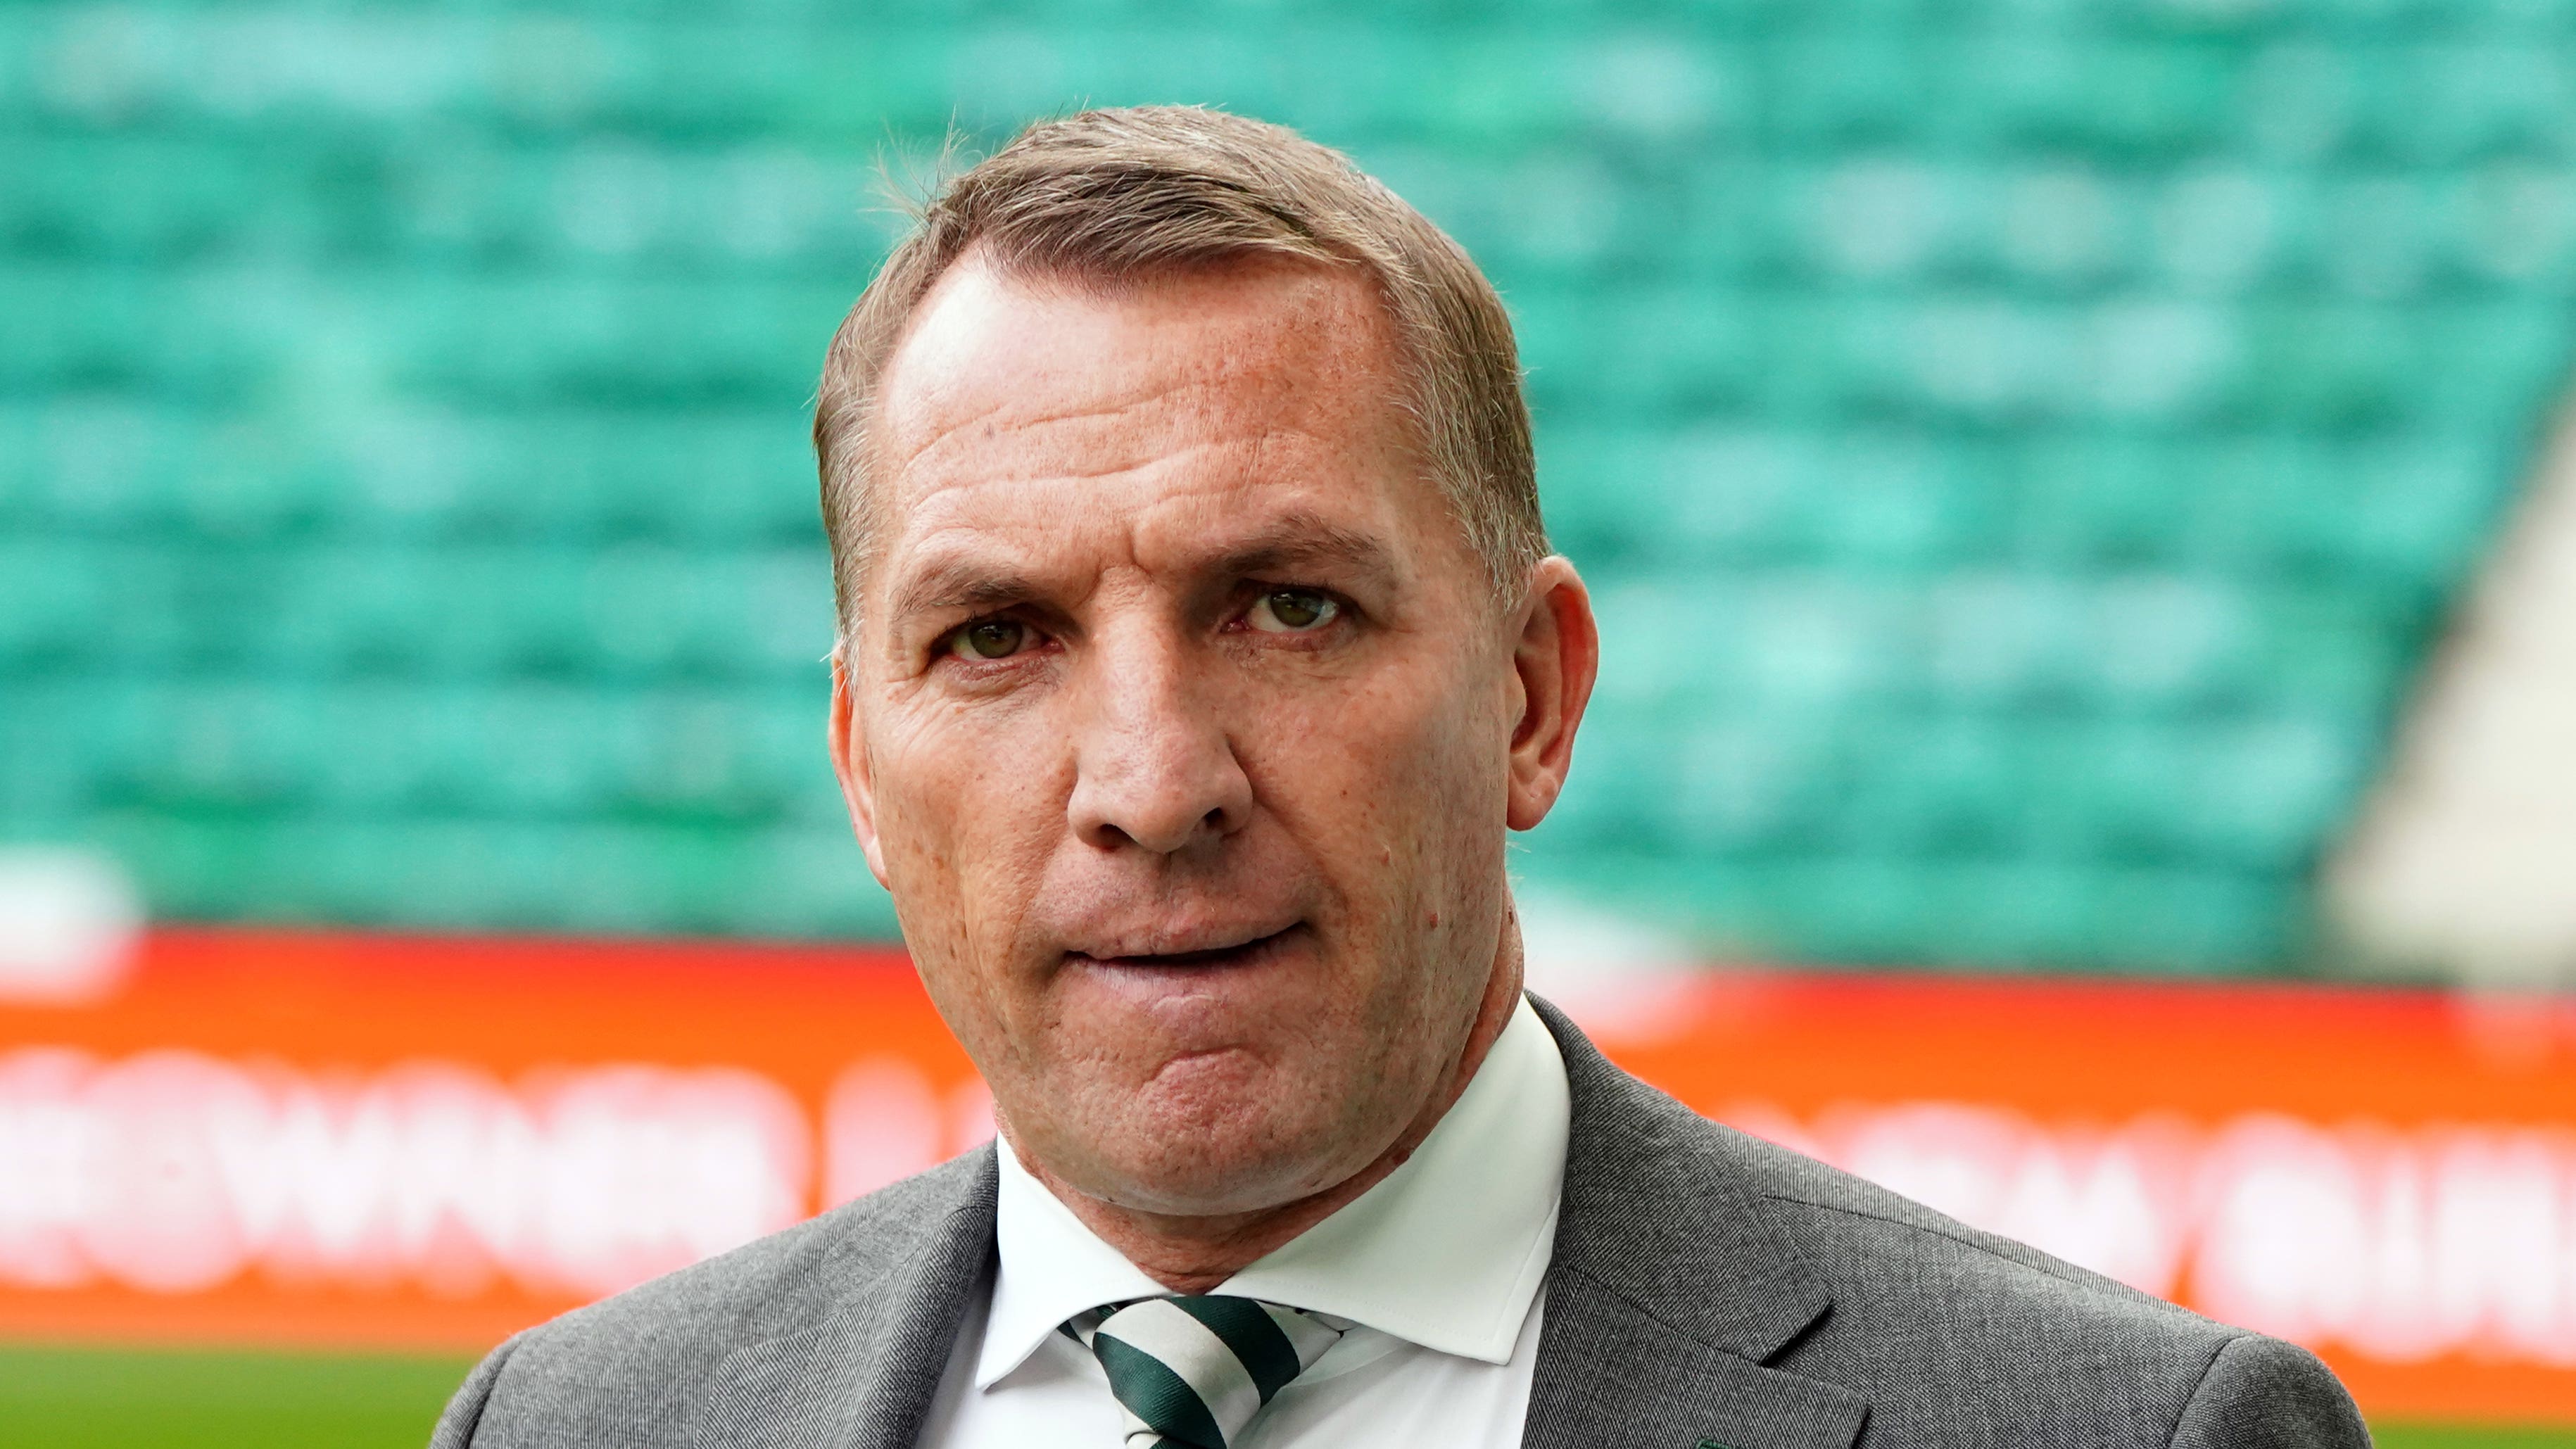 Brendan Rodgers says meeting the Pope a ‘real privilege’ and ‘life achievement’